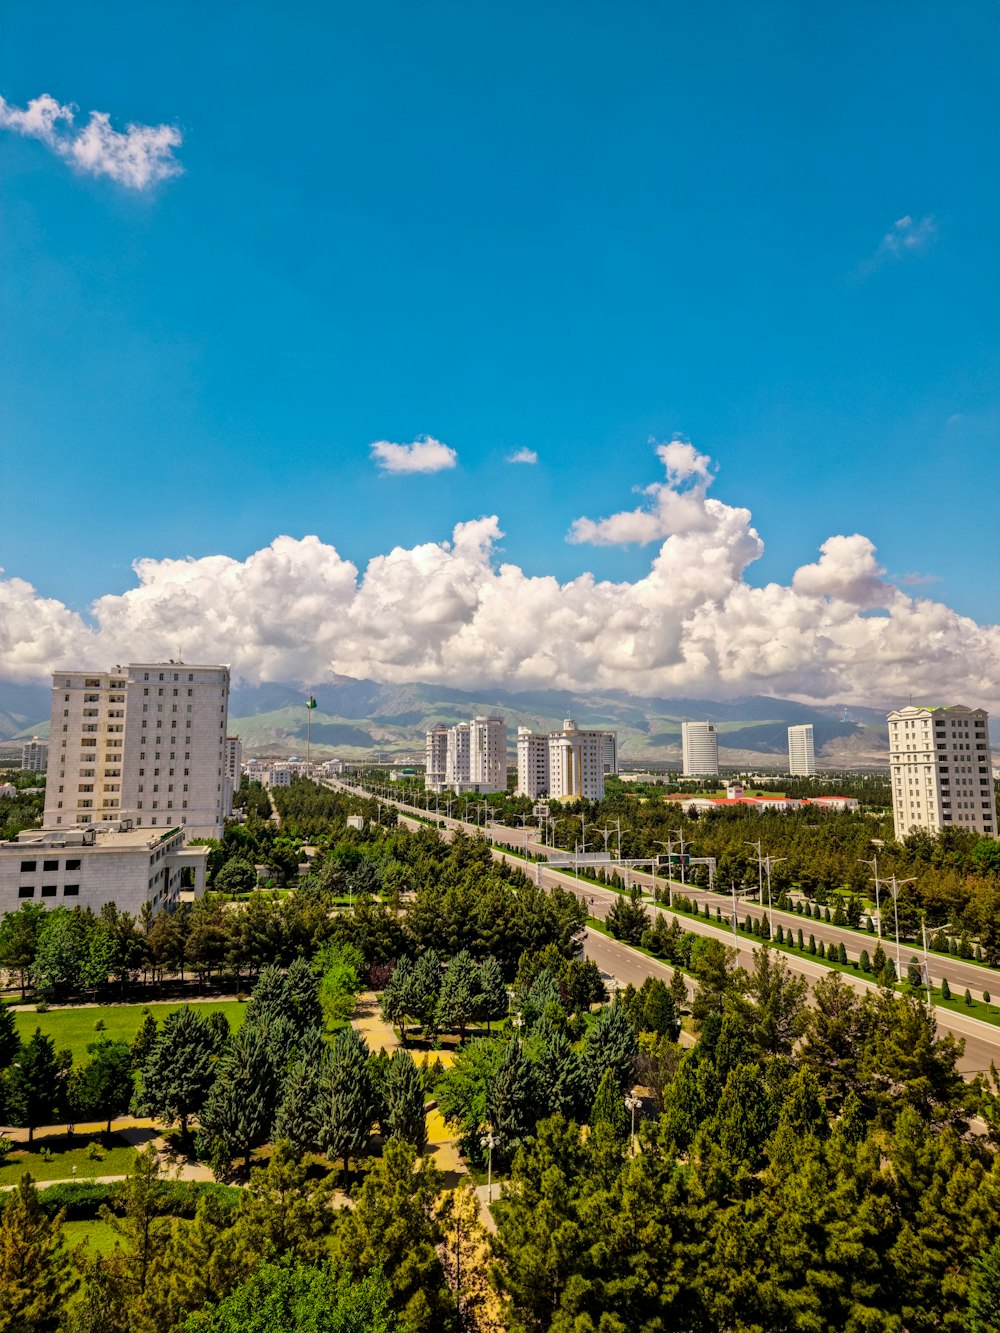 a city landscape with trees and buildings